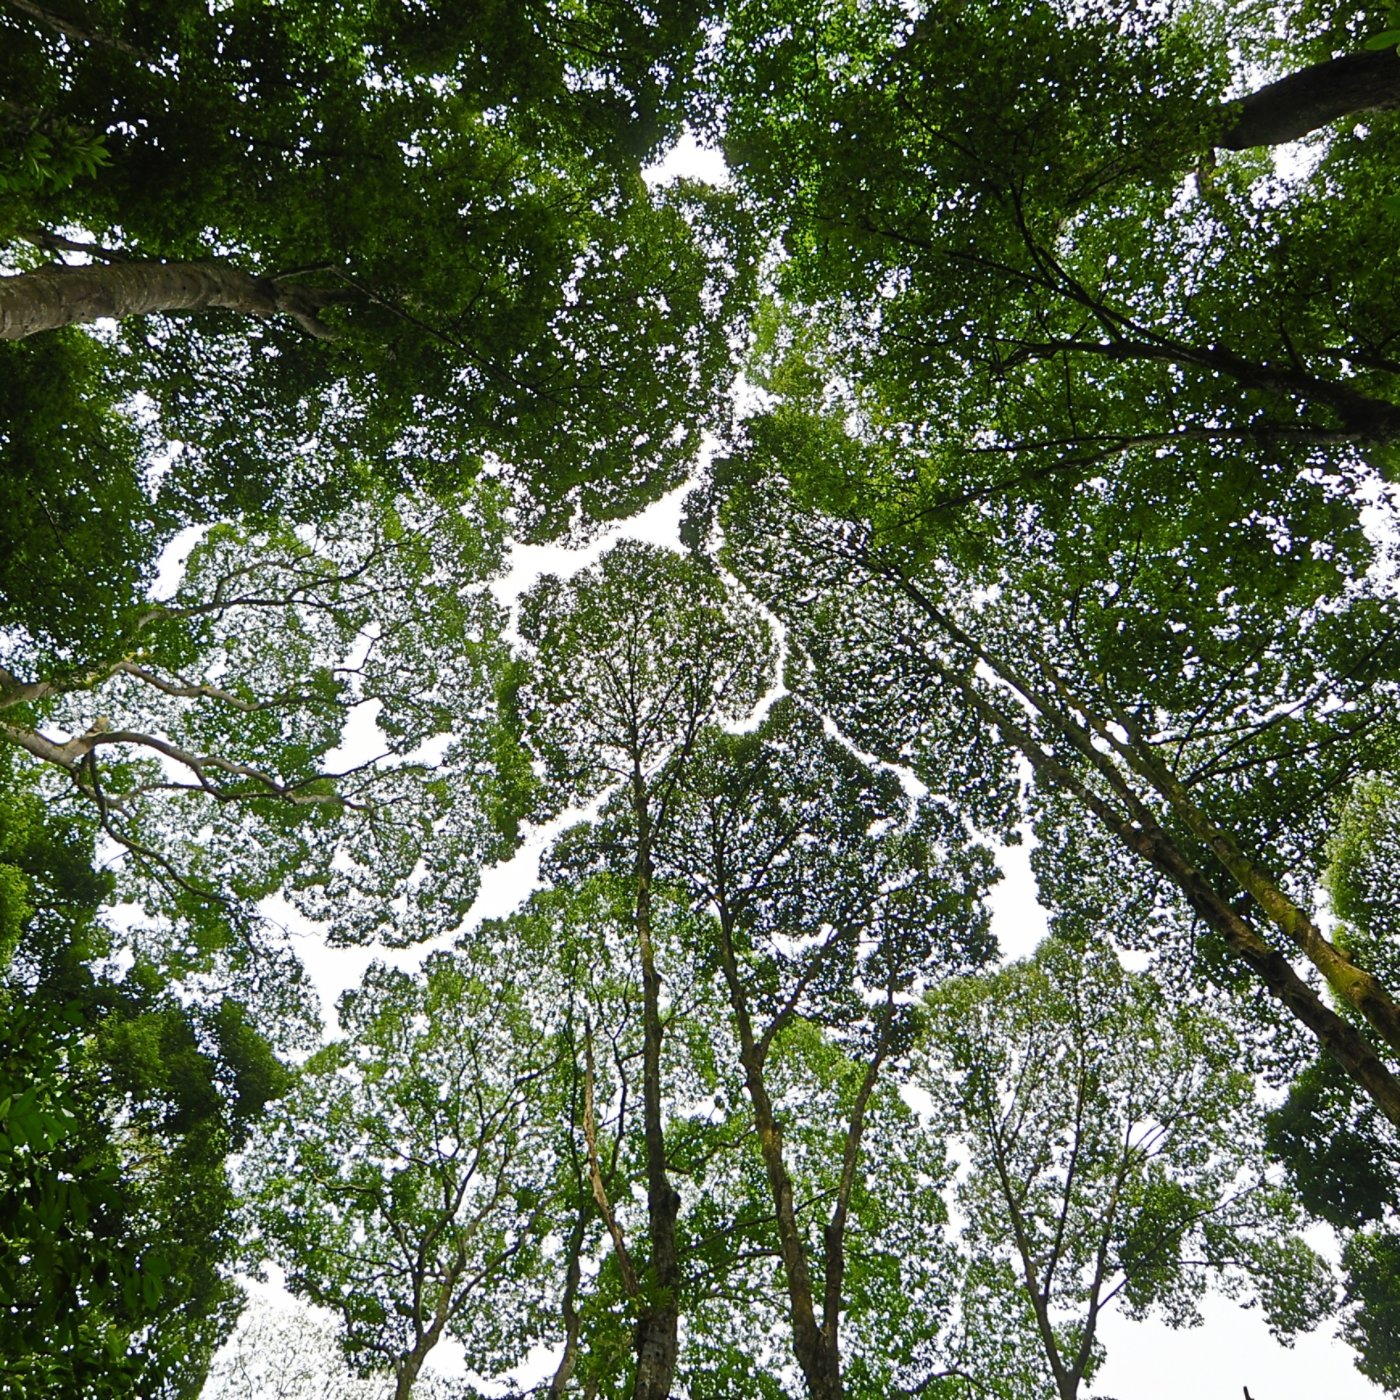 A phenomenon present in some tree species, in which the crowns do not touch each other. Thus, the canopy appears to have channel-like gaps.